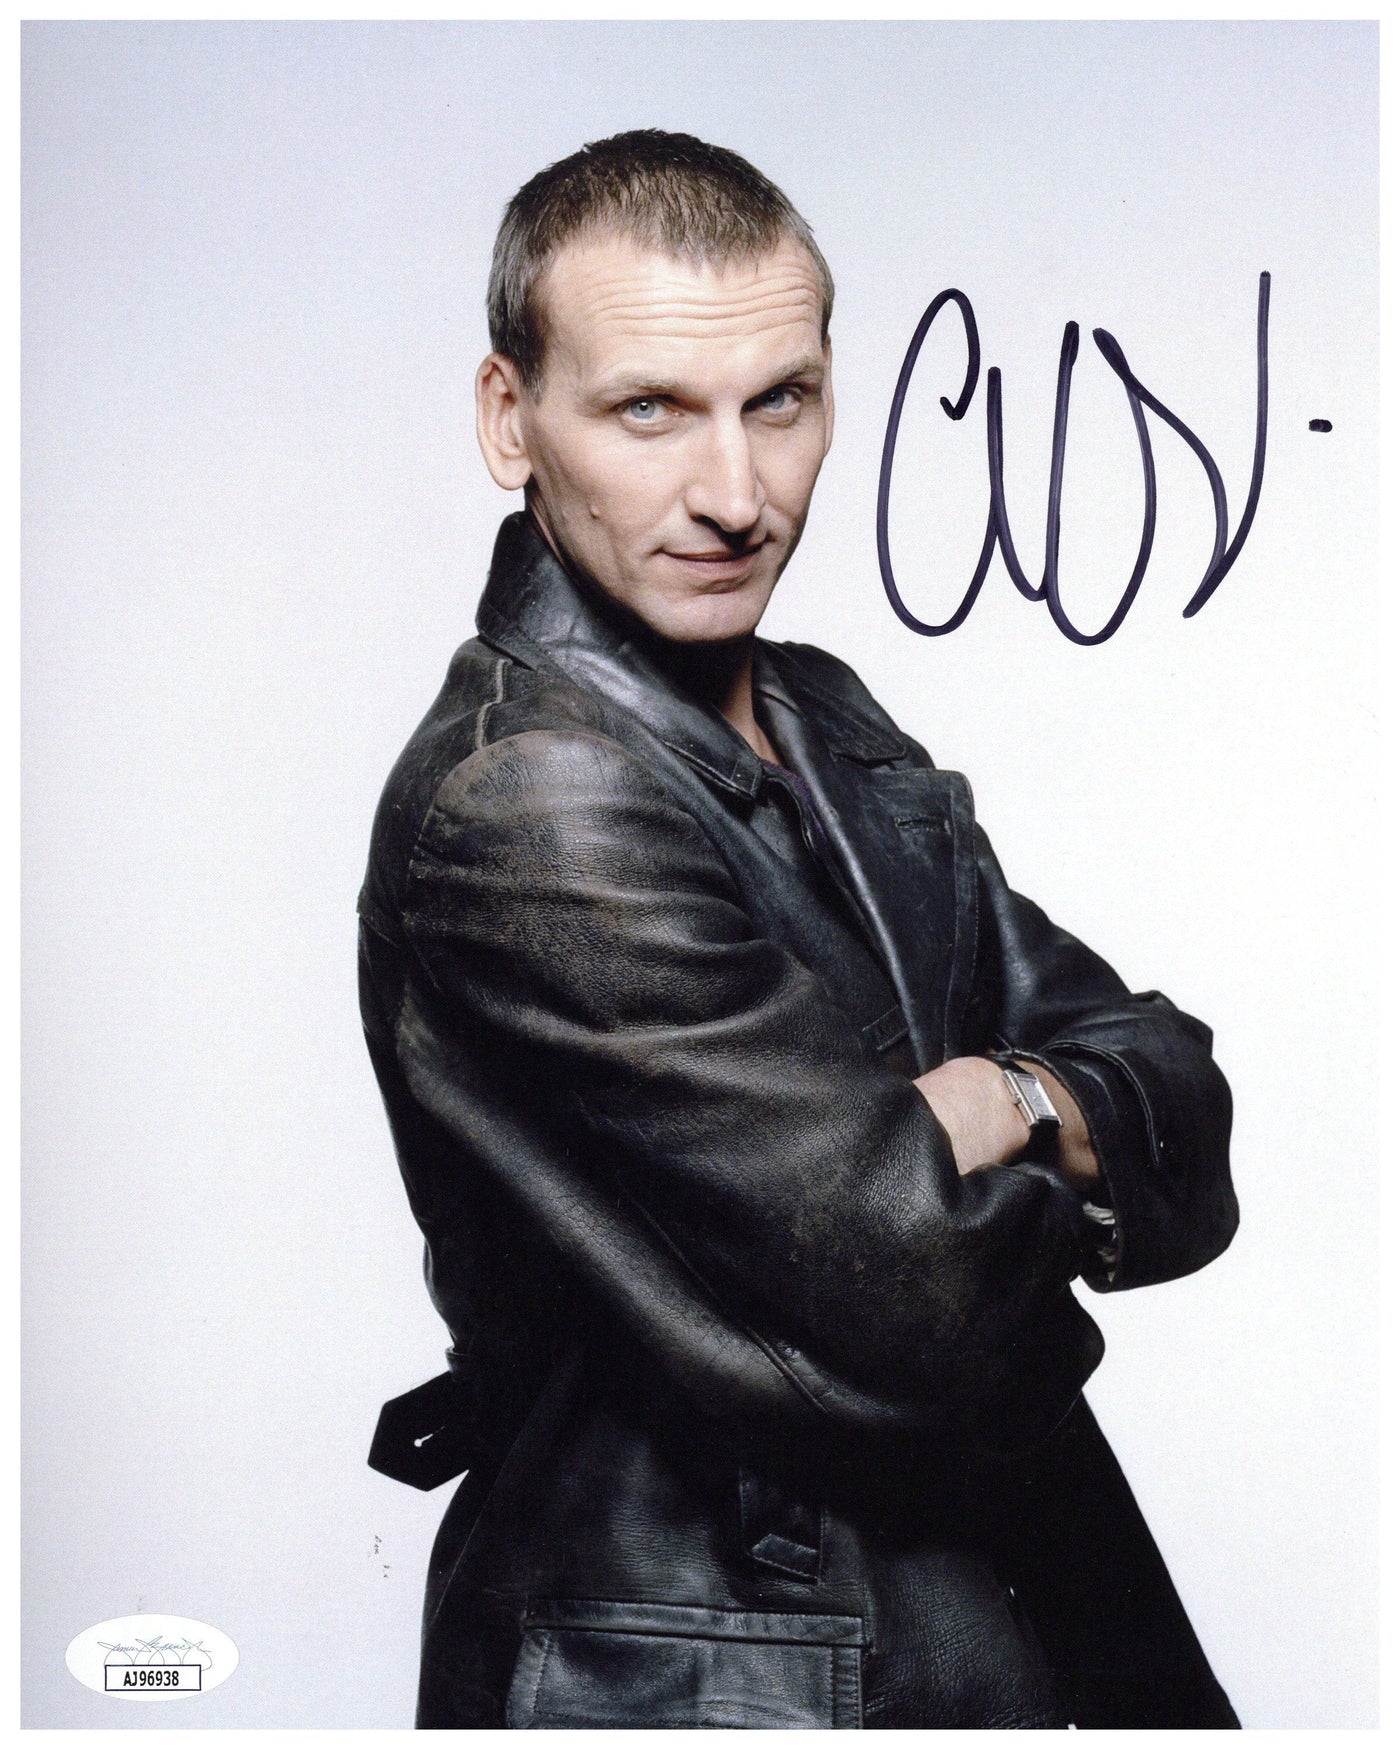 Christopher Eccleston Signed 8x10 Photo Doctor Who Autographed JSA COA #2